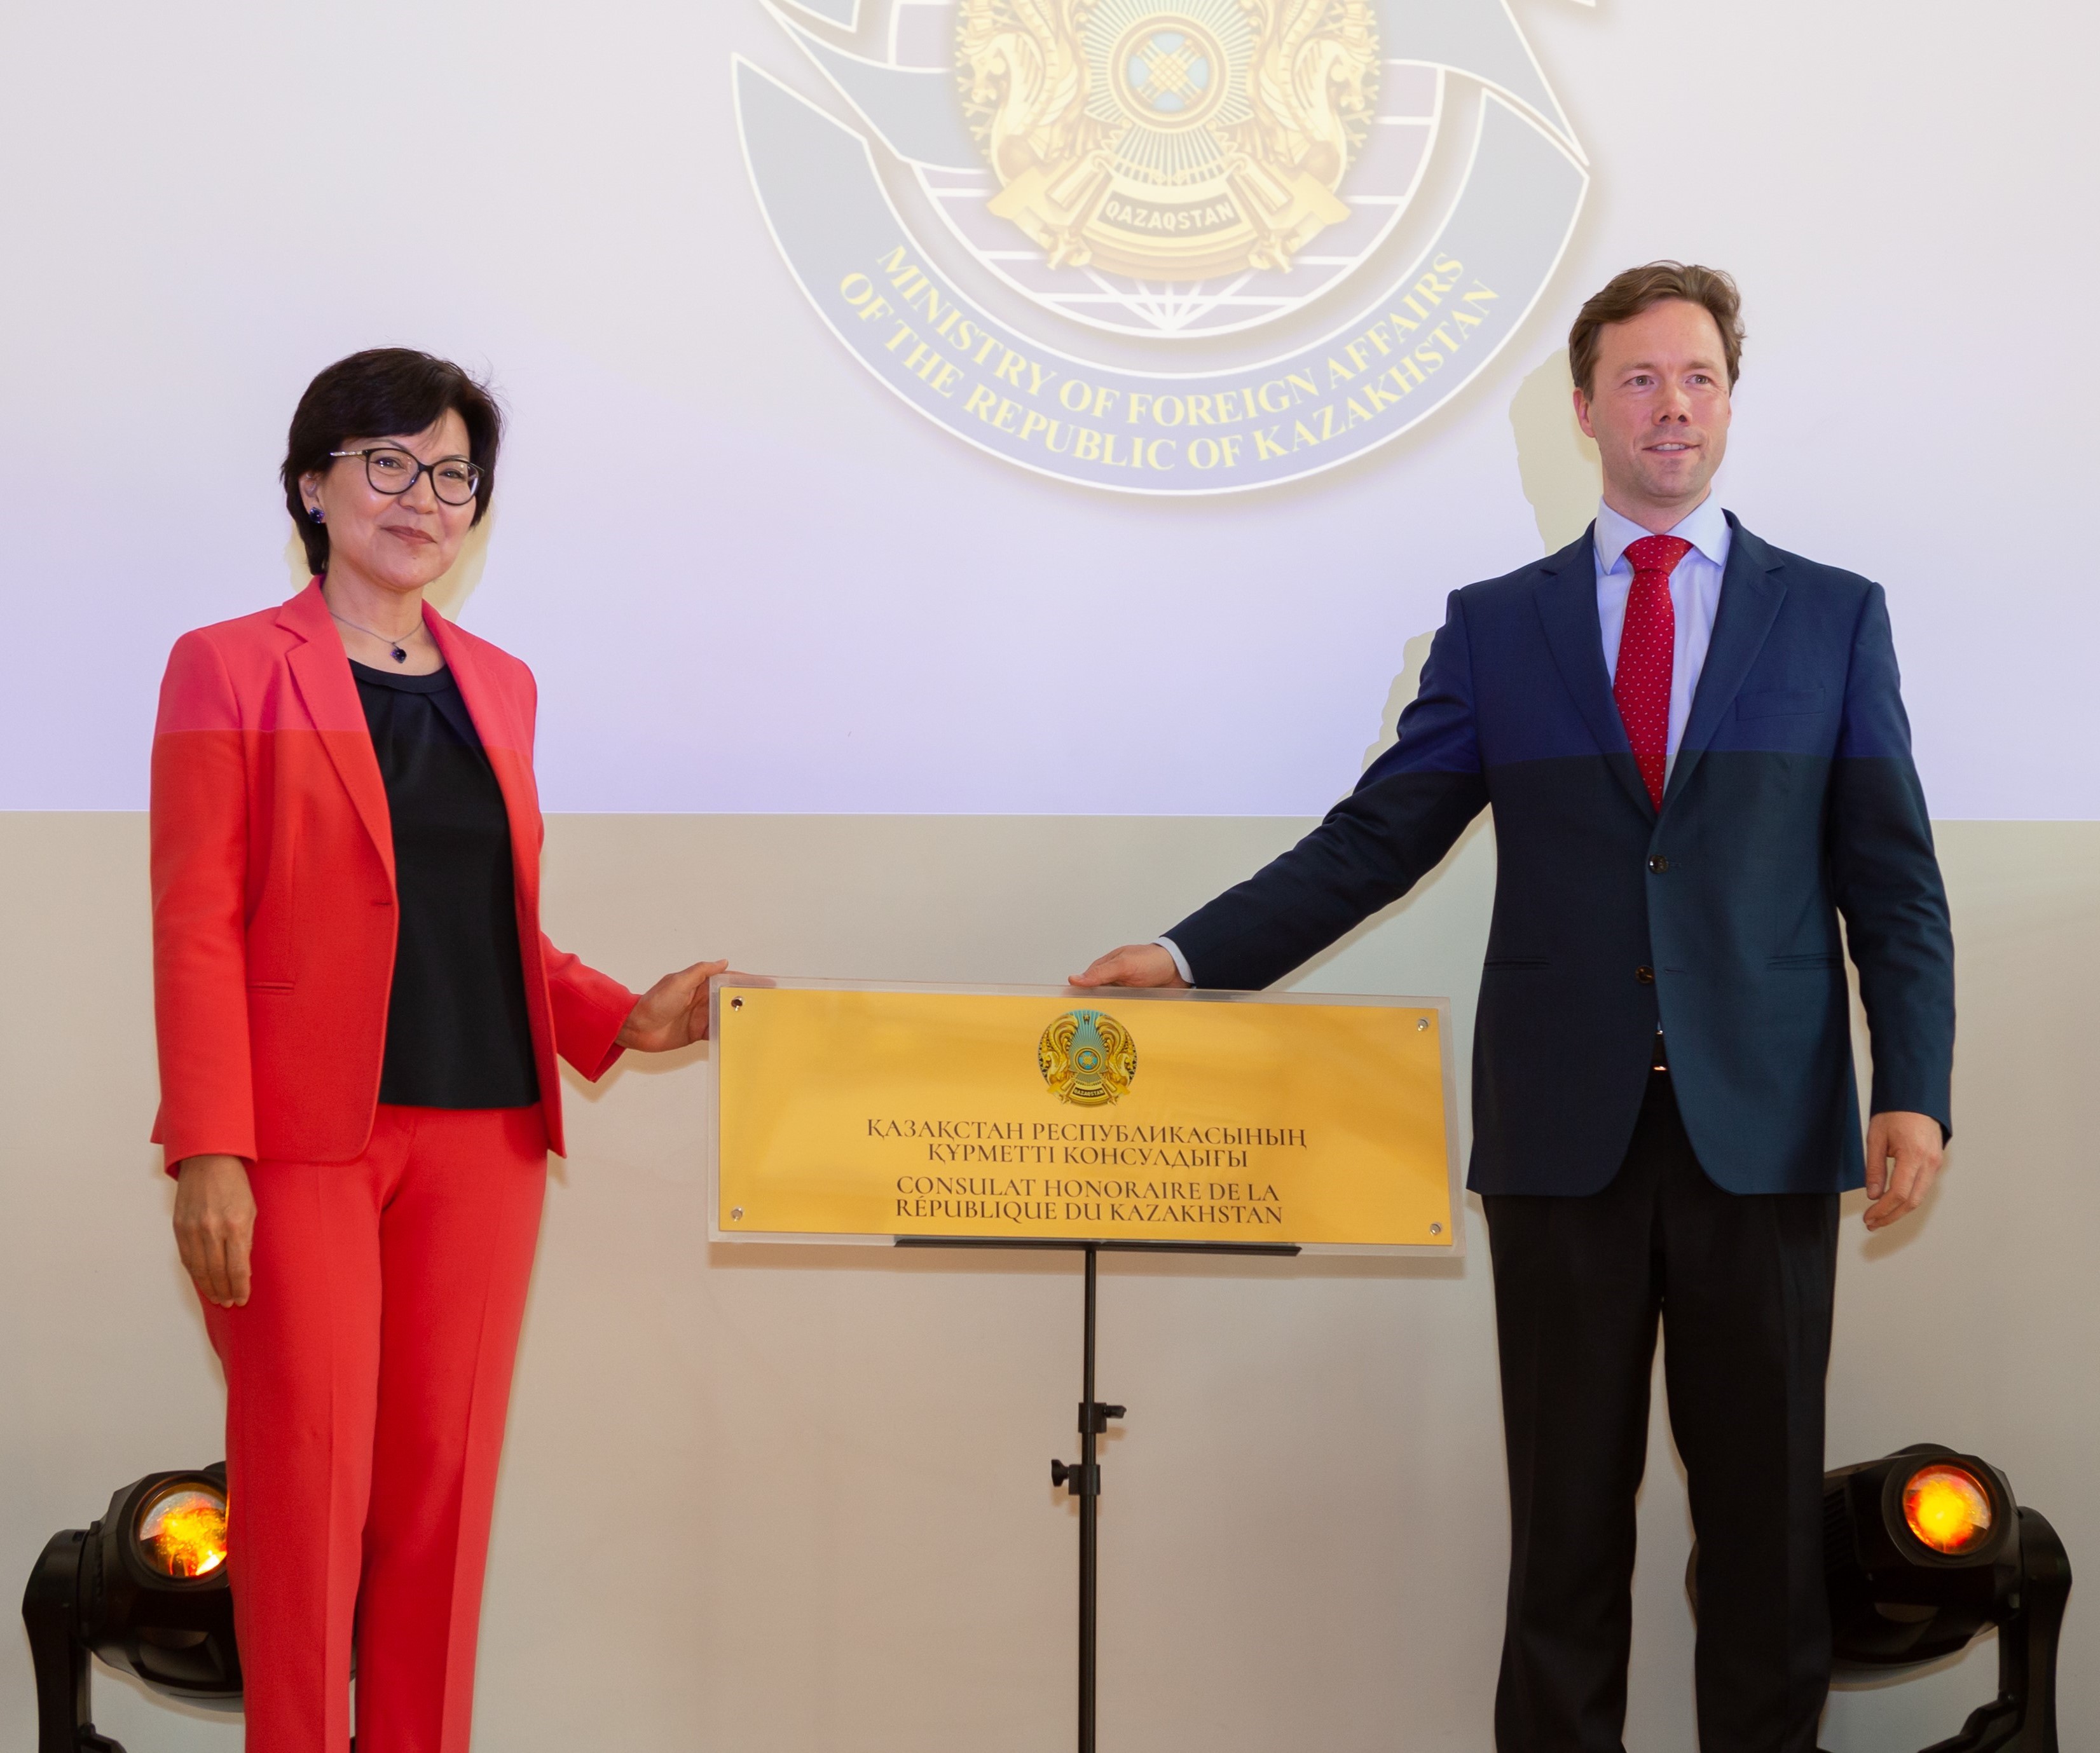 Gala reception in Luxembourg marks Eurasian Resources Group’s five-year anniversary and the opening of the Honorary Consulate of the Republic of Kazakhstan in the Grand Duchy 